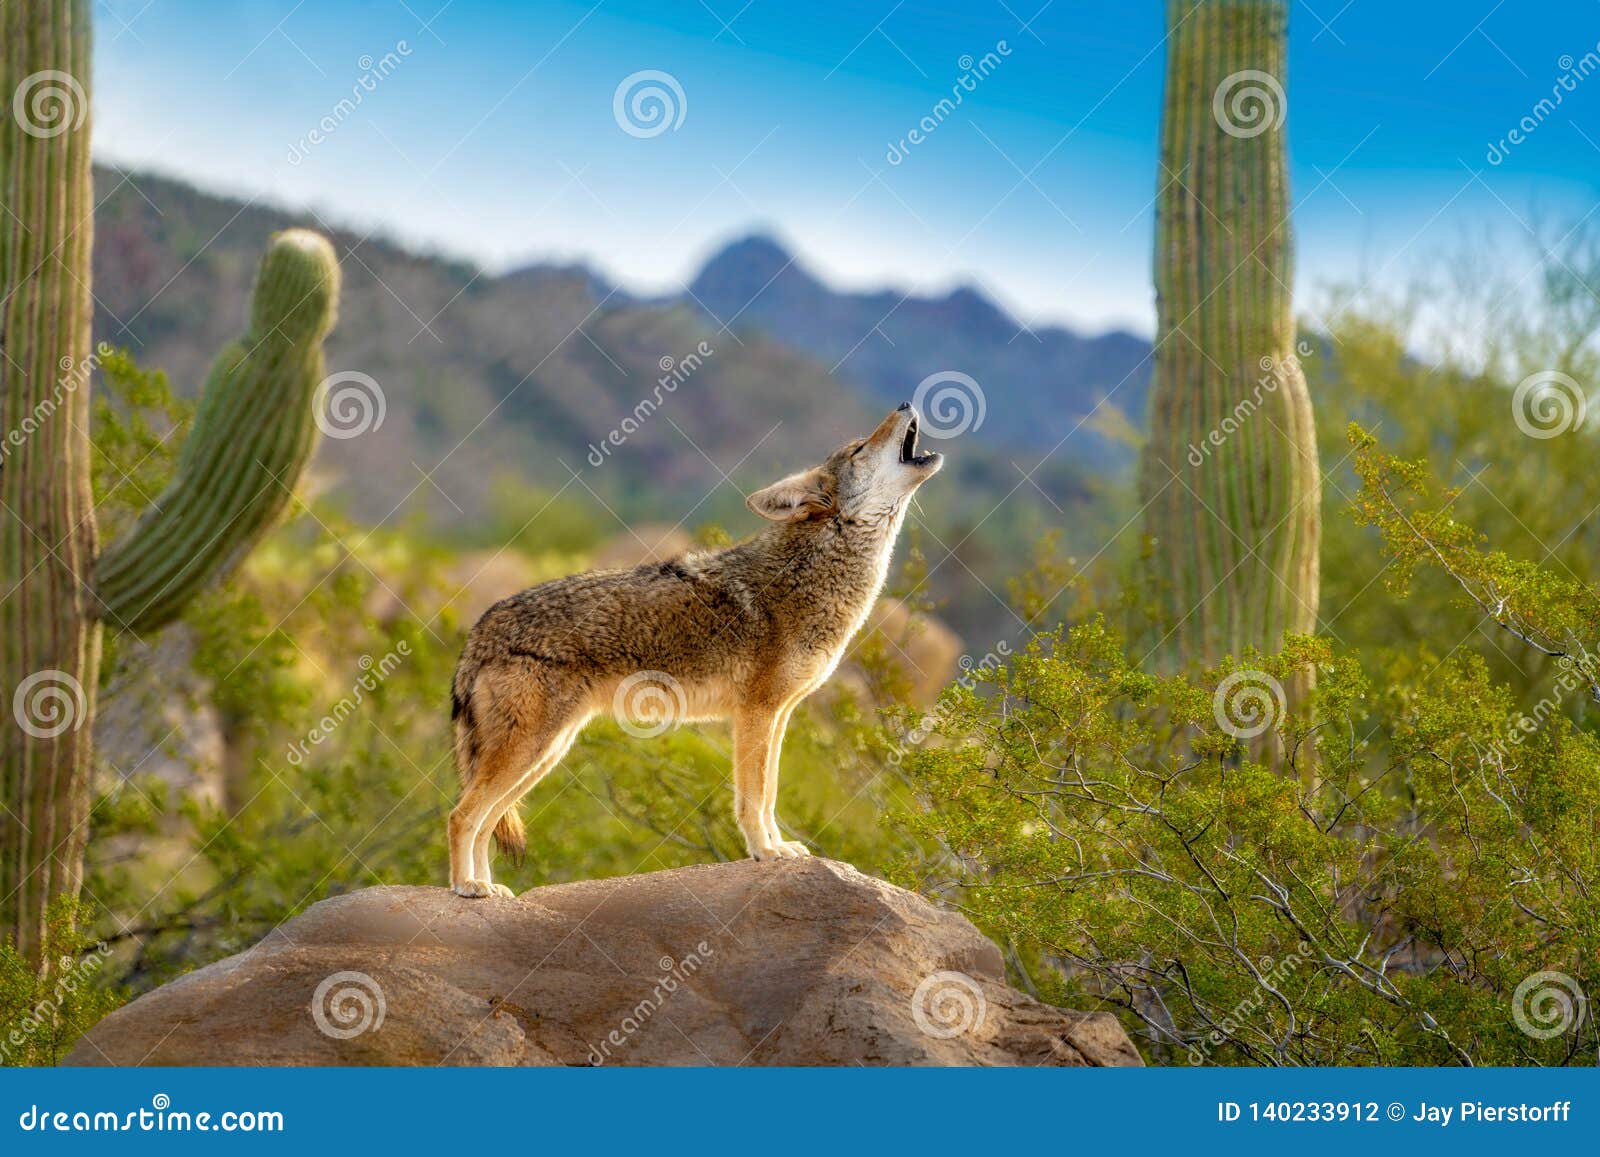 howling coyote standing on rock with saguaro cacti